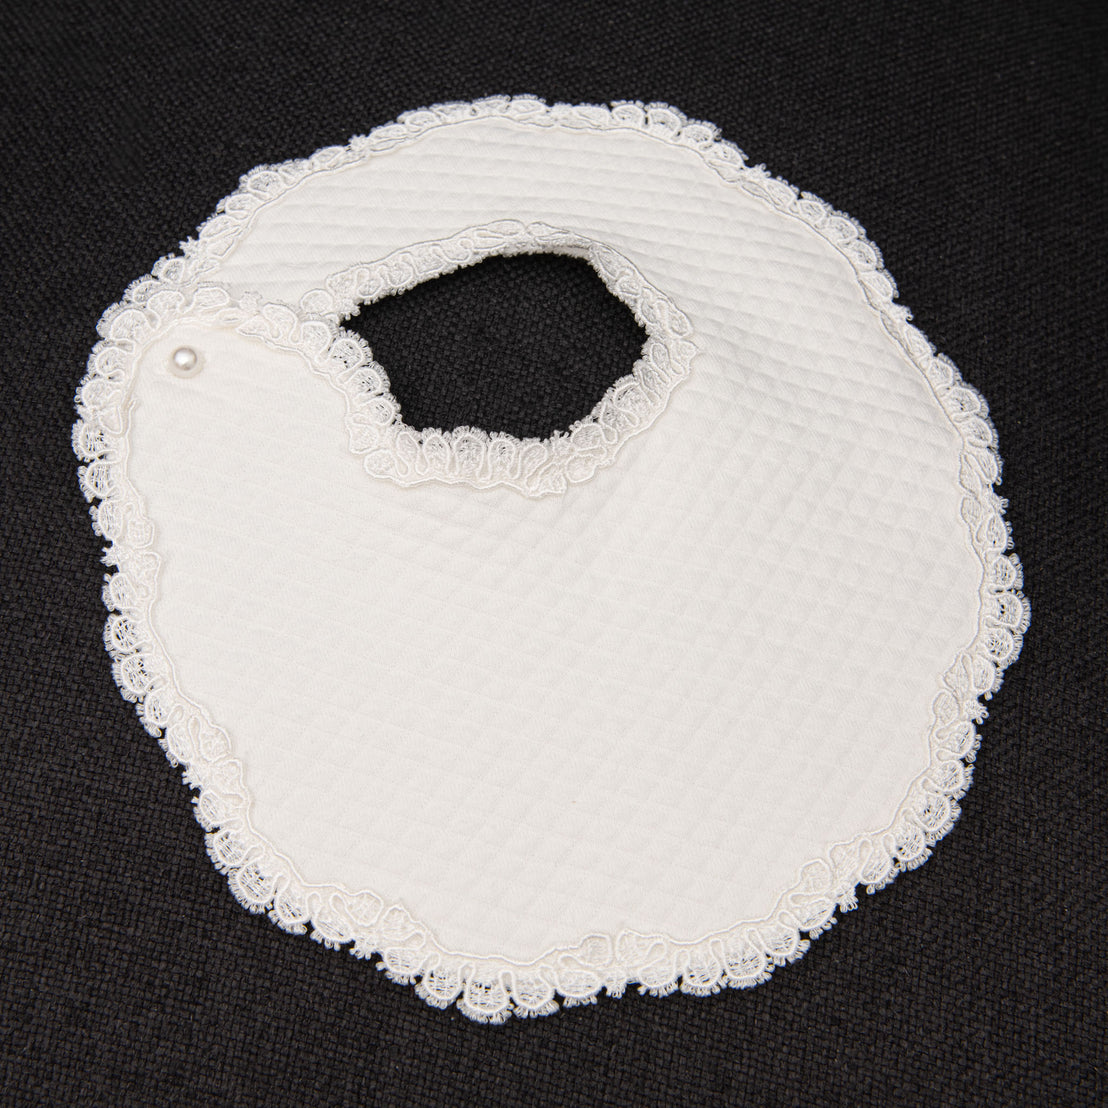 flat lay photo of baptism bib made of quilted cotton and floral edge lace.